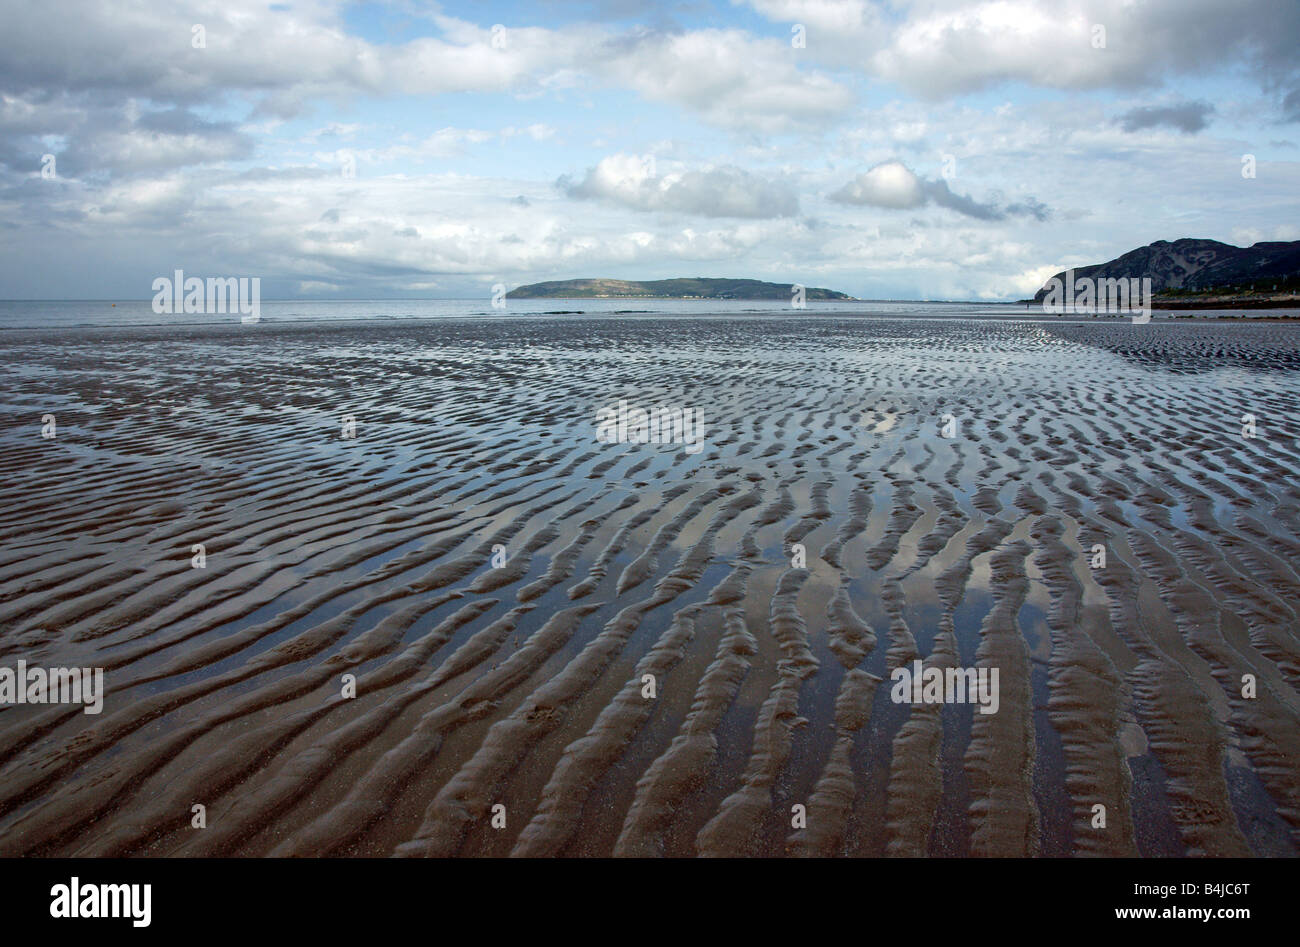 Llandudno seen from the beach at Penmaenmawr in North Wales Stock Photo